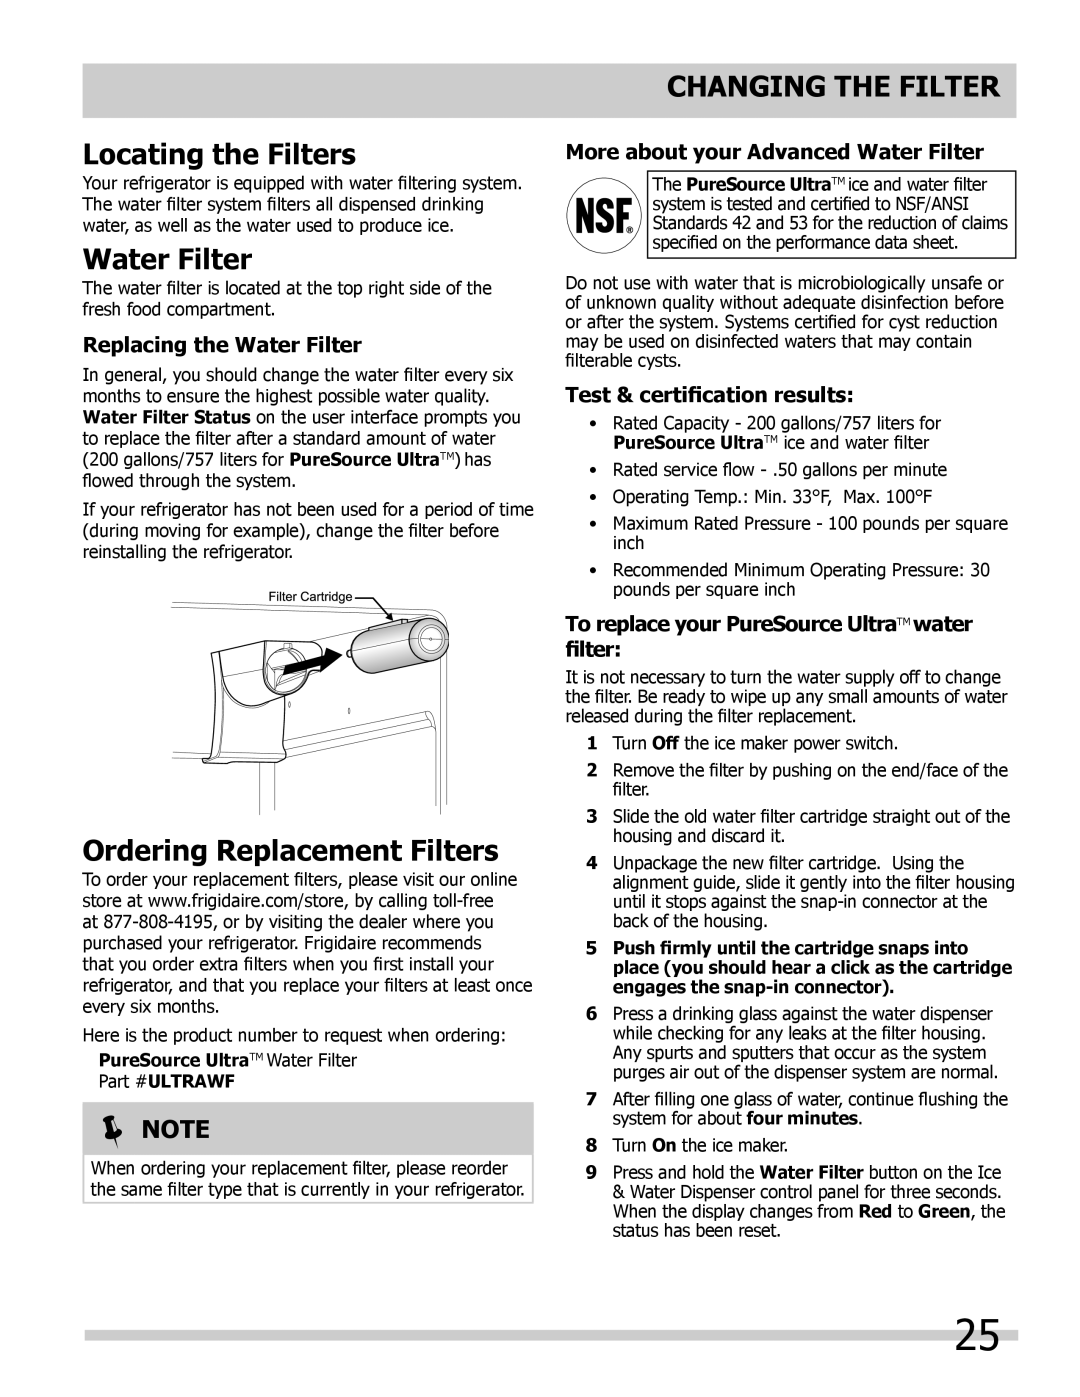 Frigidaire FGHB2844LF5 manual Locating the Filters, Water Filter, Ordering Replacement Filters, Changing The Filter, Note 